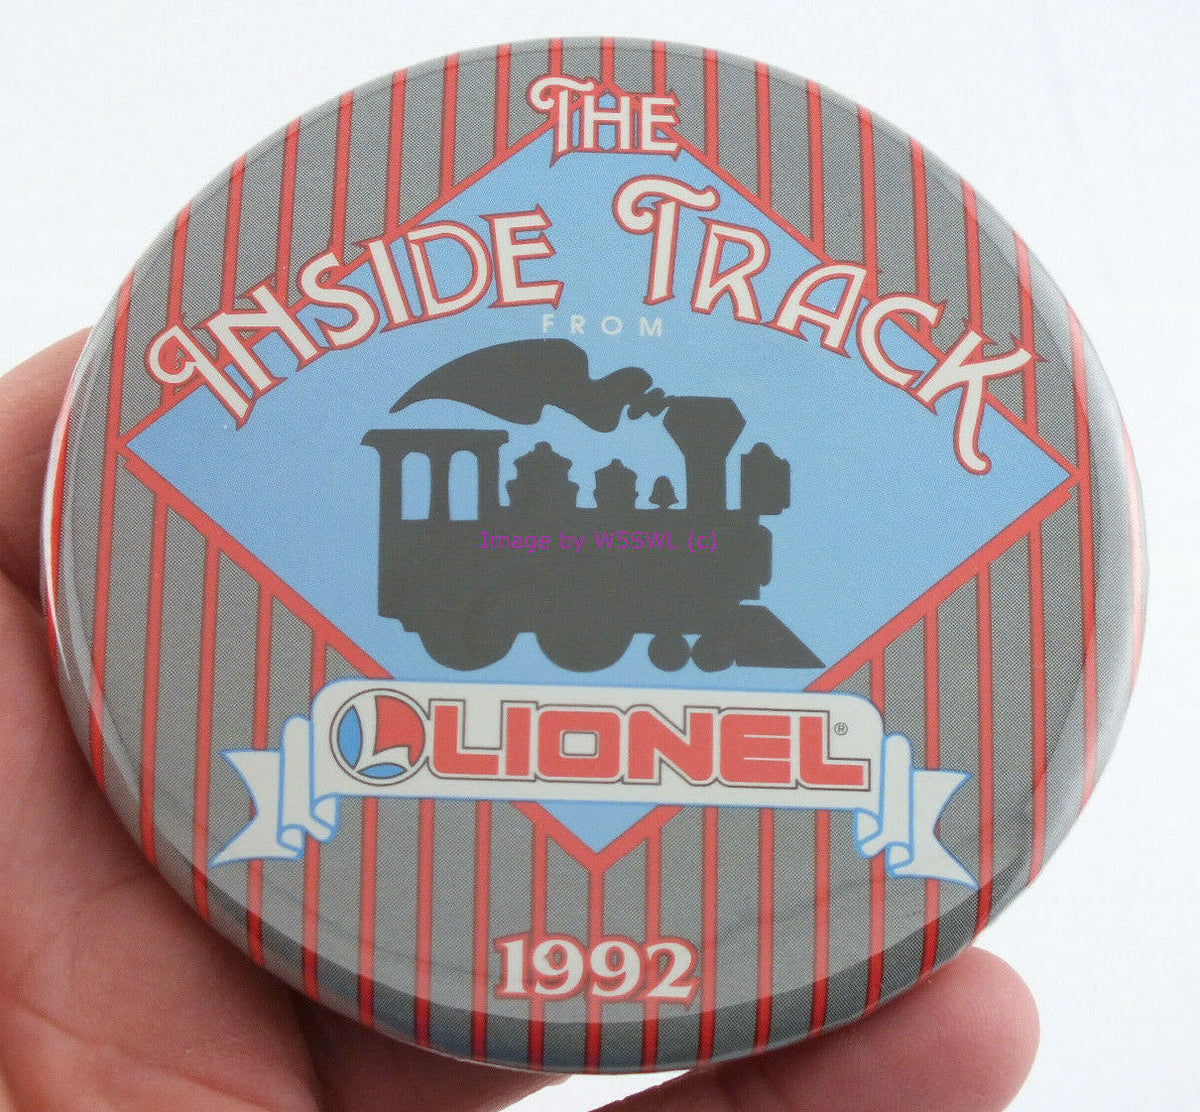 Lionel 1992 The Inside Track Button - Dave's Hobby Shop by W5SWL